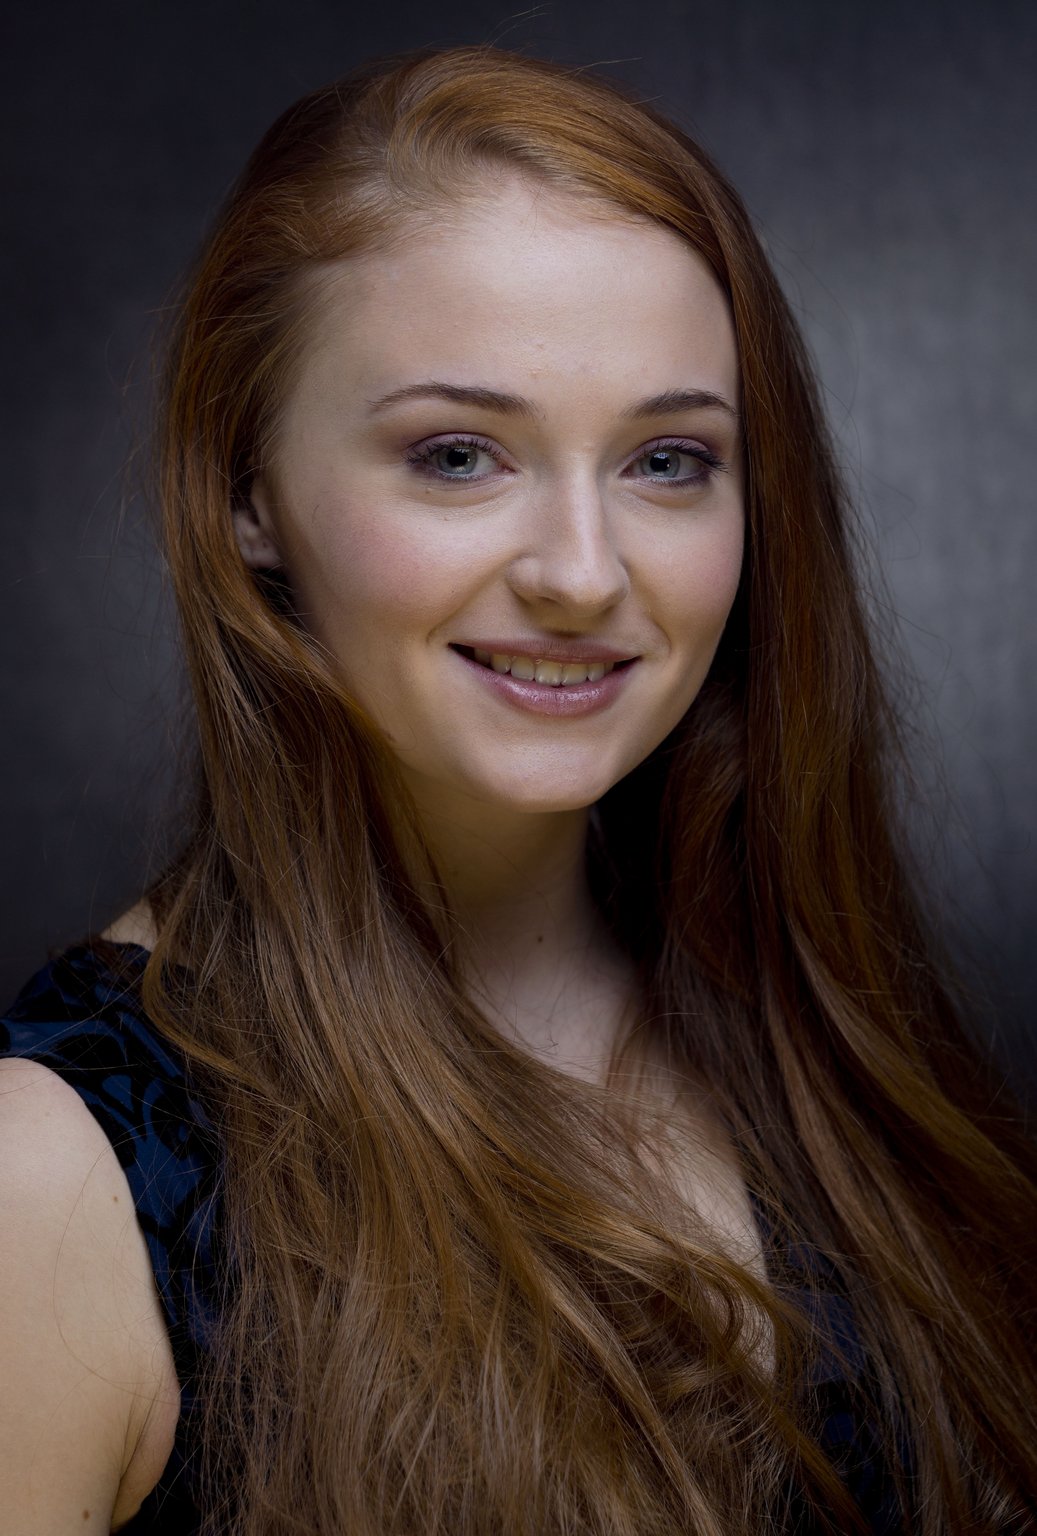 Sophie Turner (actress) photo 14 of 1340 pics, wallpaper - photo #647893 - ThePlace2